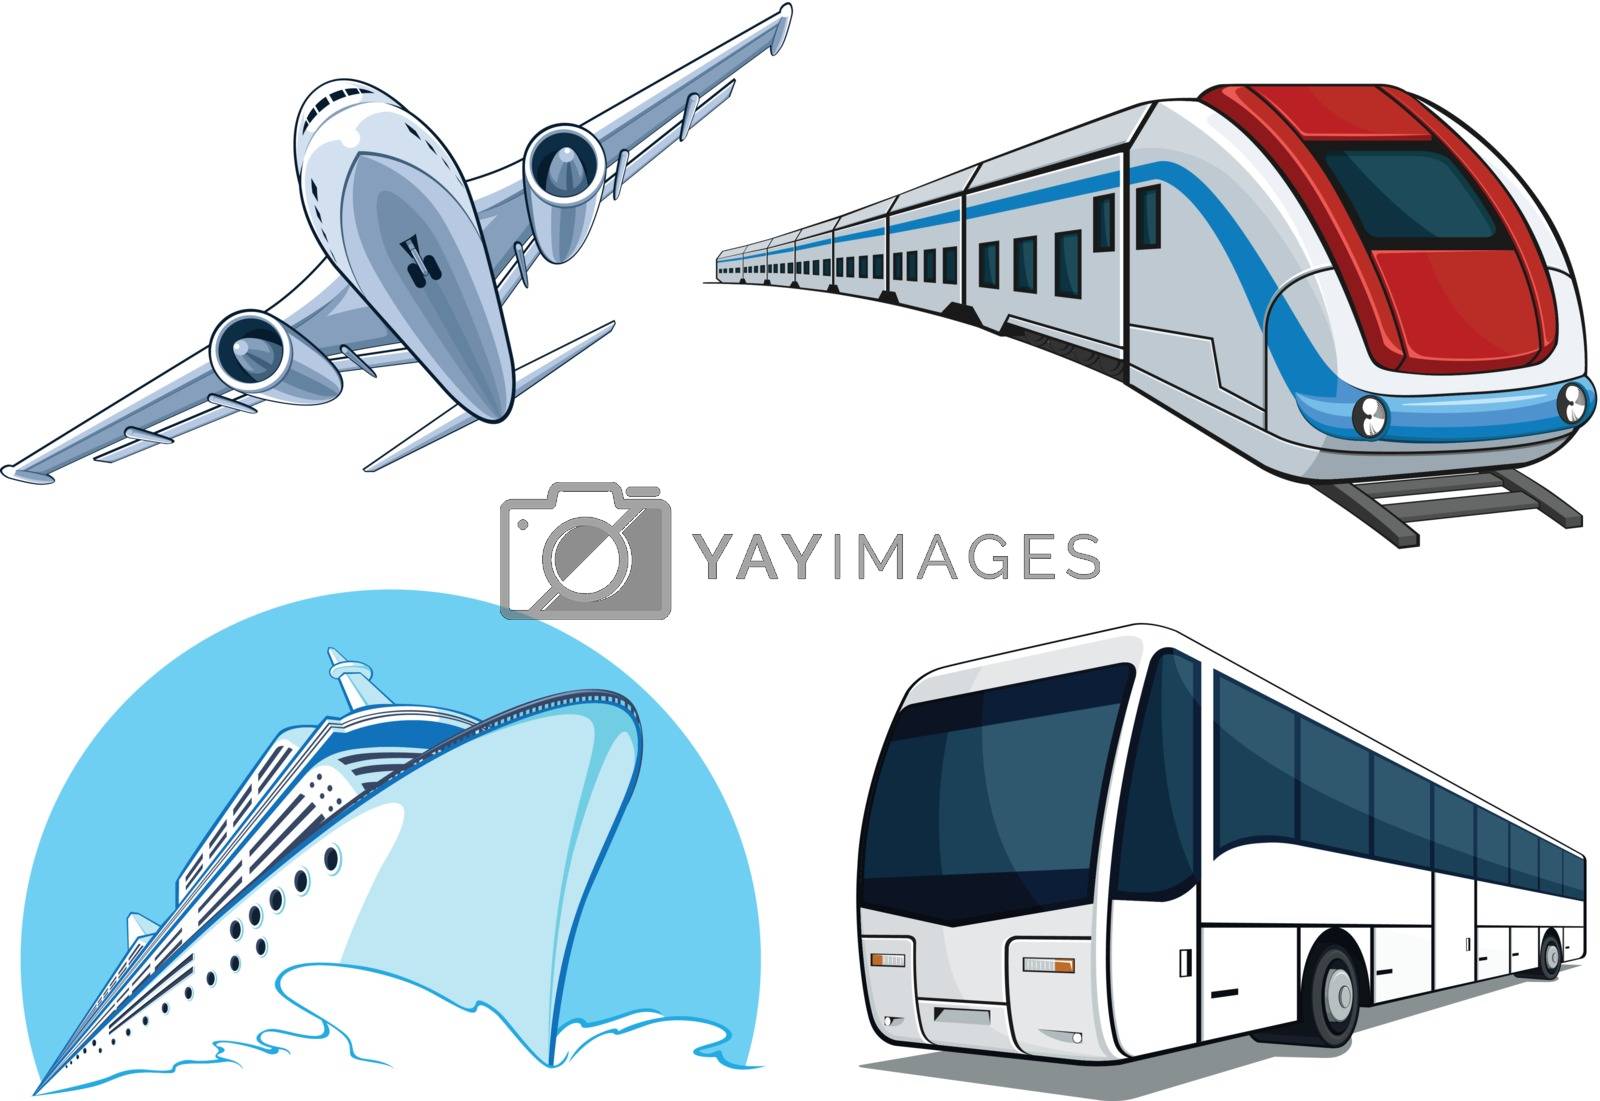 A vector set of 4 different transportation model : airplane, bus, cruise ship and train. This vector is very good for design that needs transportation or travel element.

Available as a Vector in EPS8 format that can be scaled to any size without loss of quality. Good for many uses & application. Elements could be separated for further editing. Color easily changed.